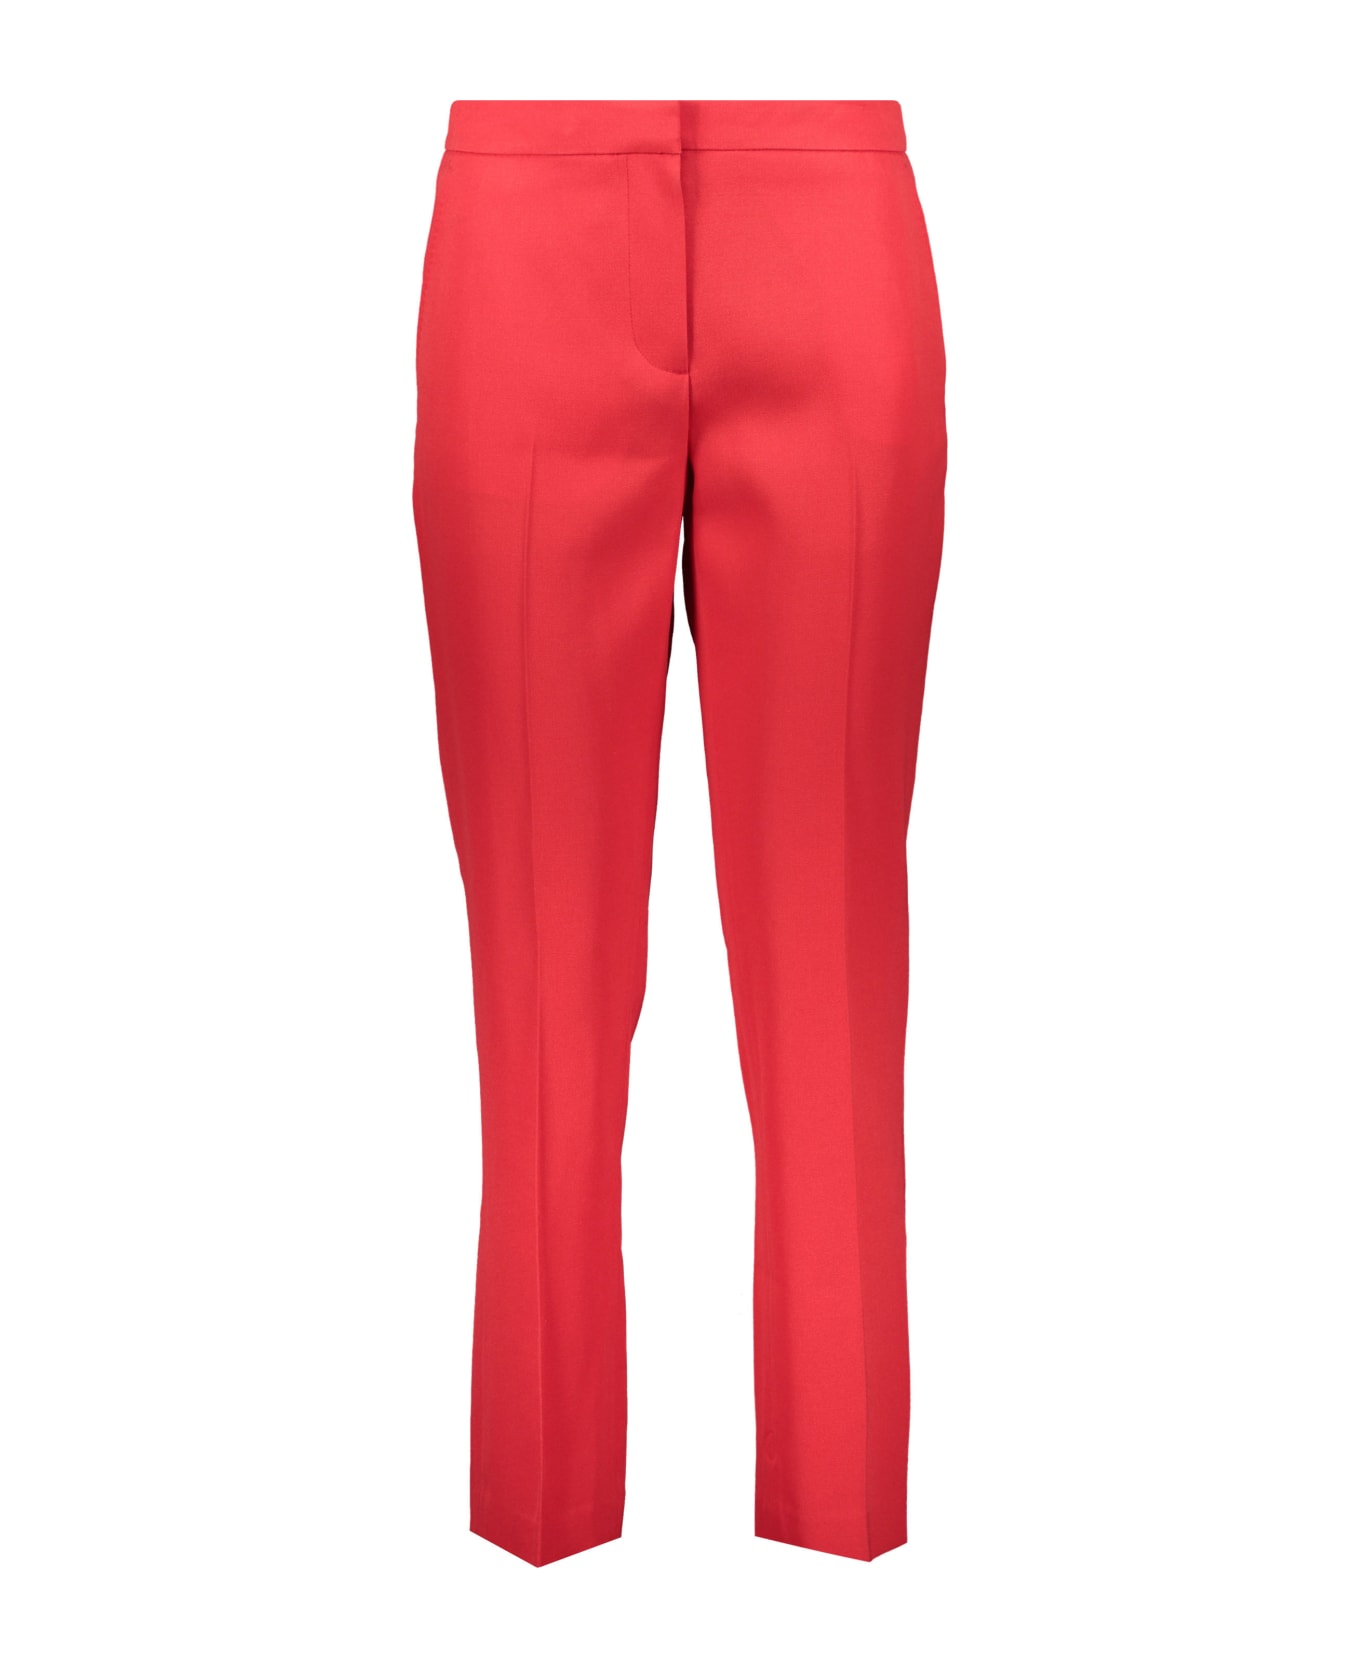 Burberry Wool Trousers - red